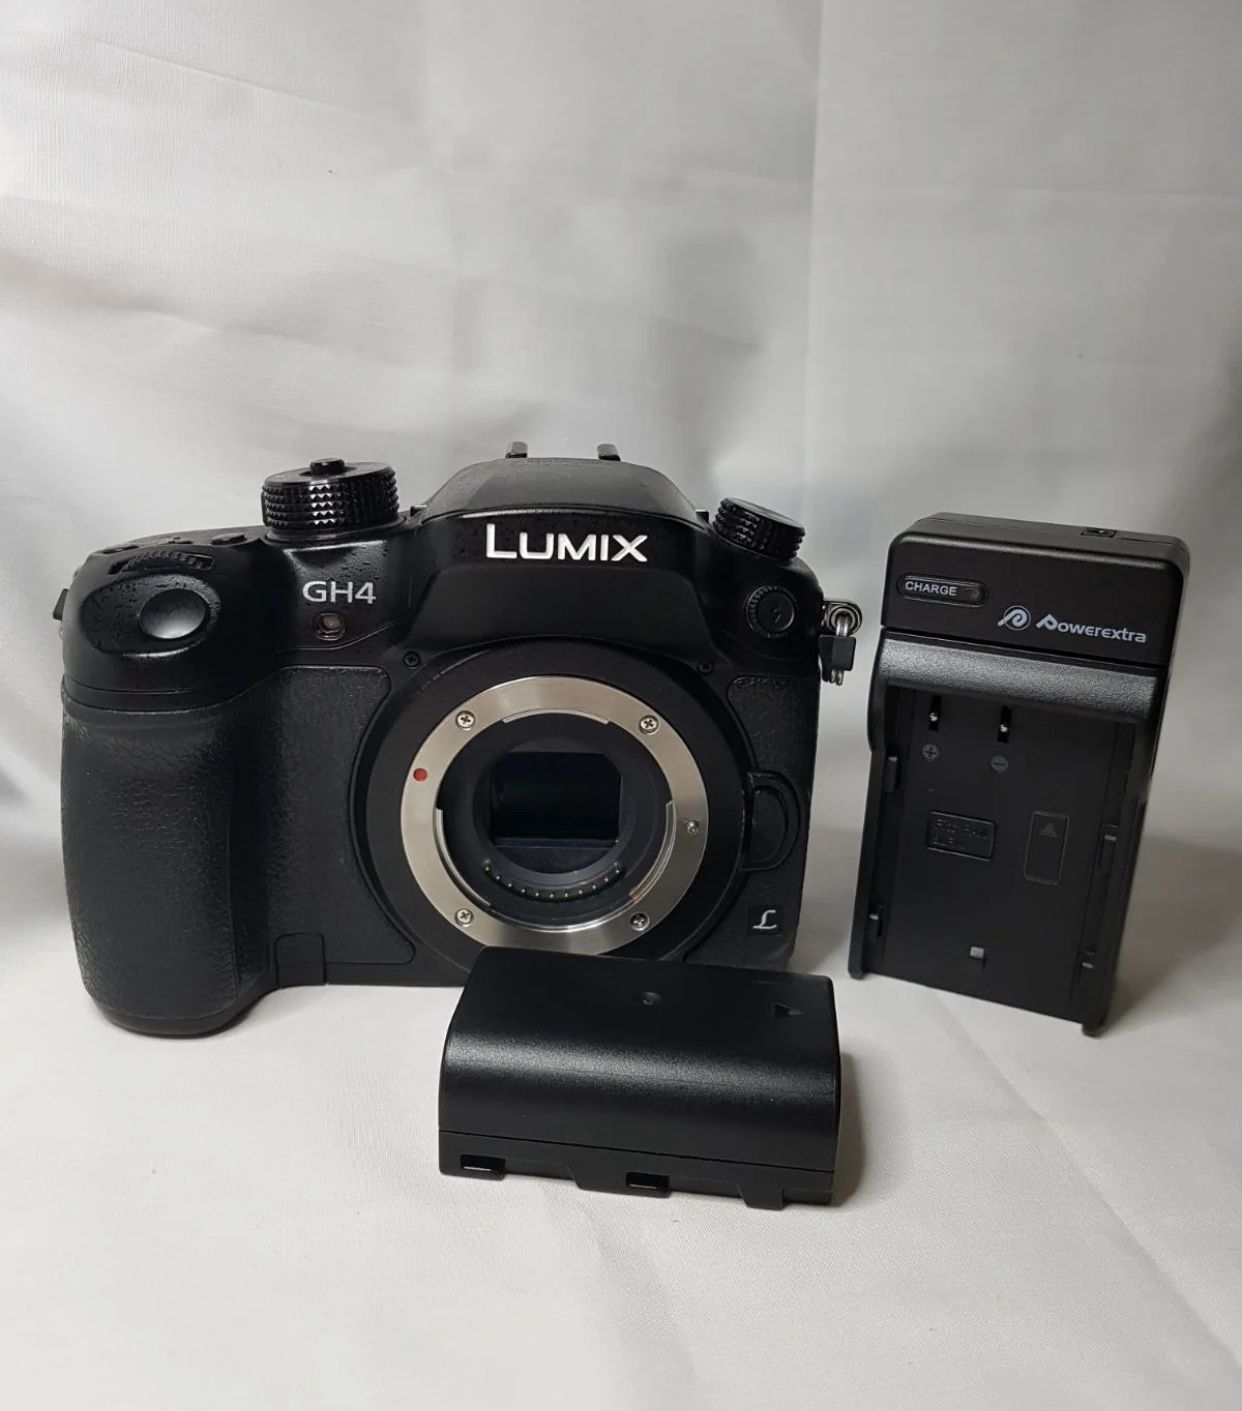 Panasonic GH4 like new condition only 991 shutter count